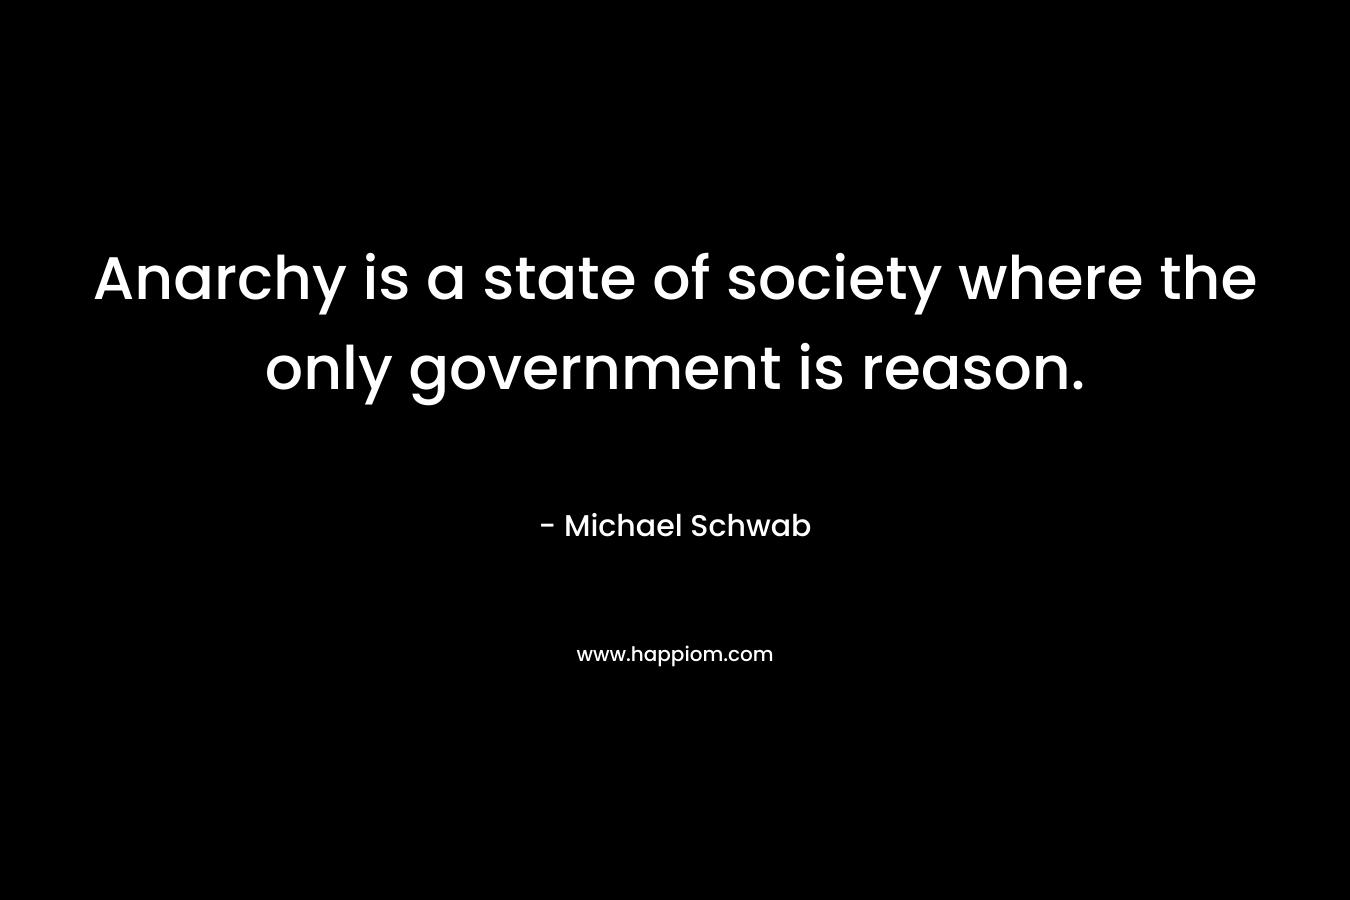 Anarchy is a state of society where the only government is reason.